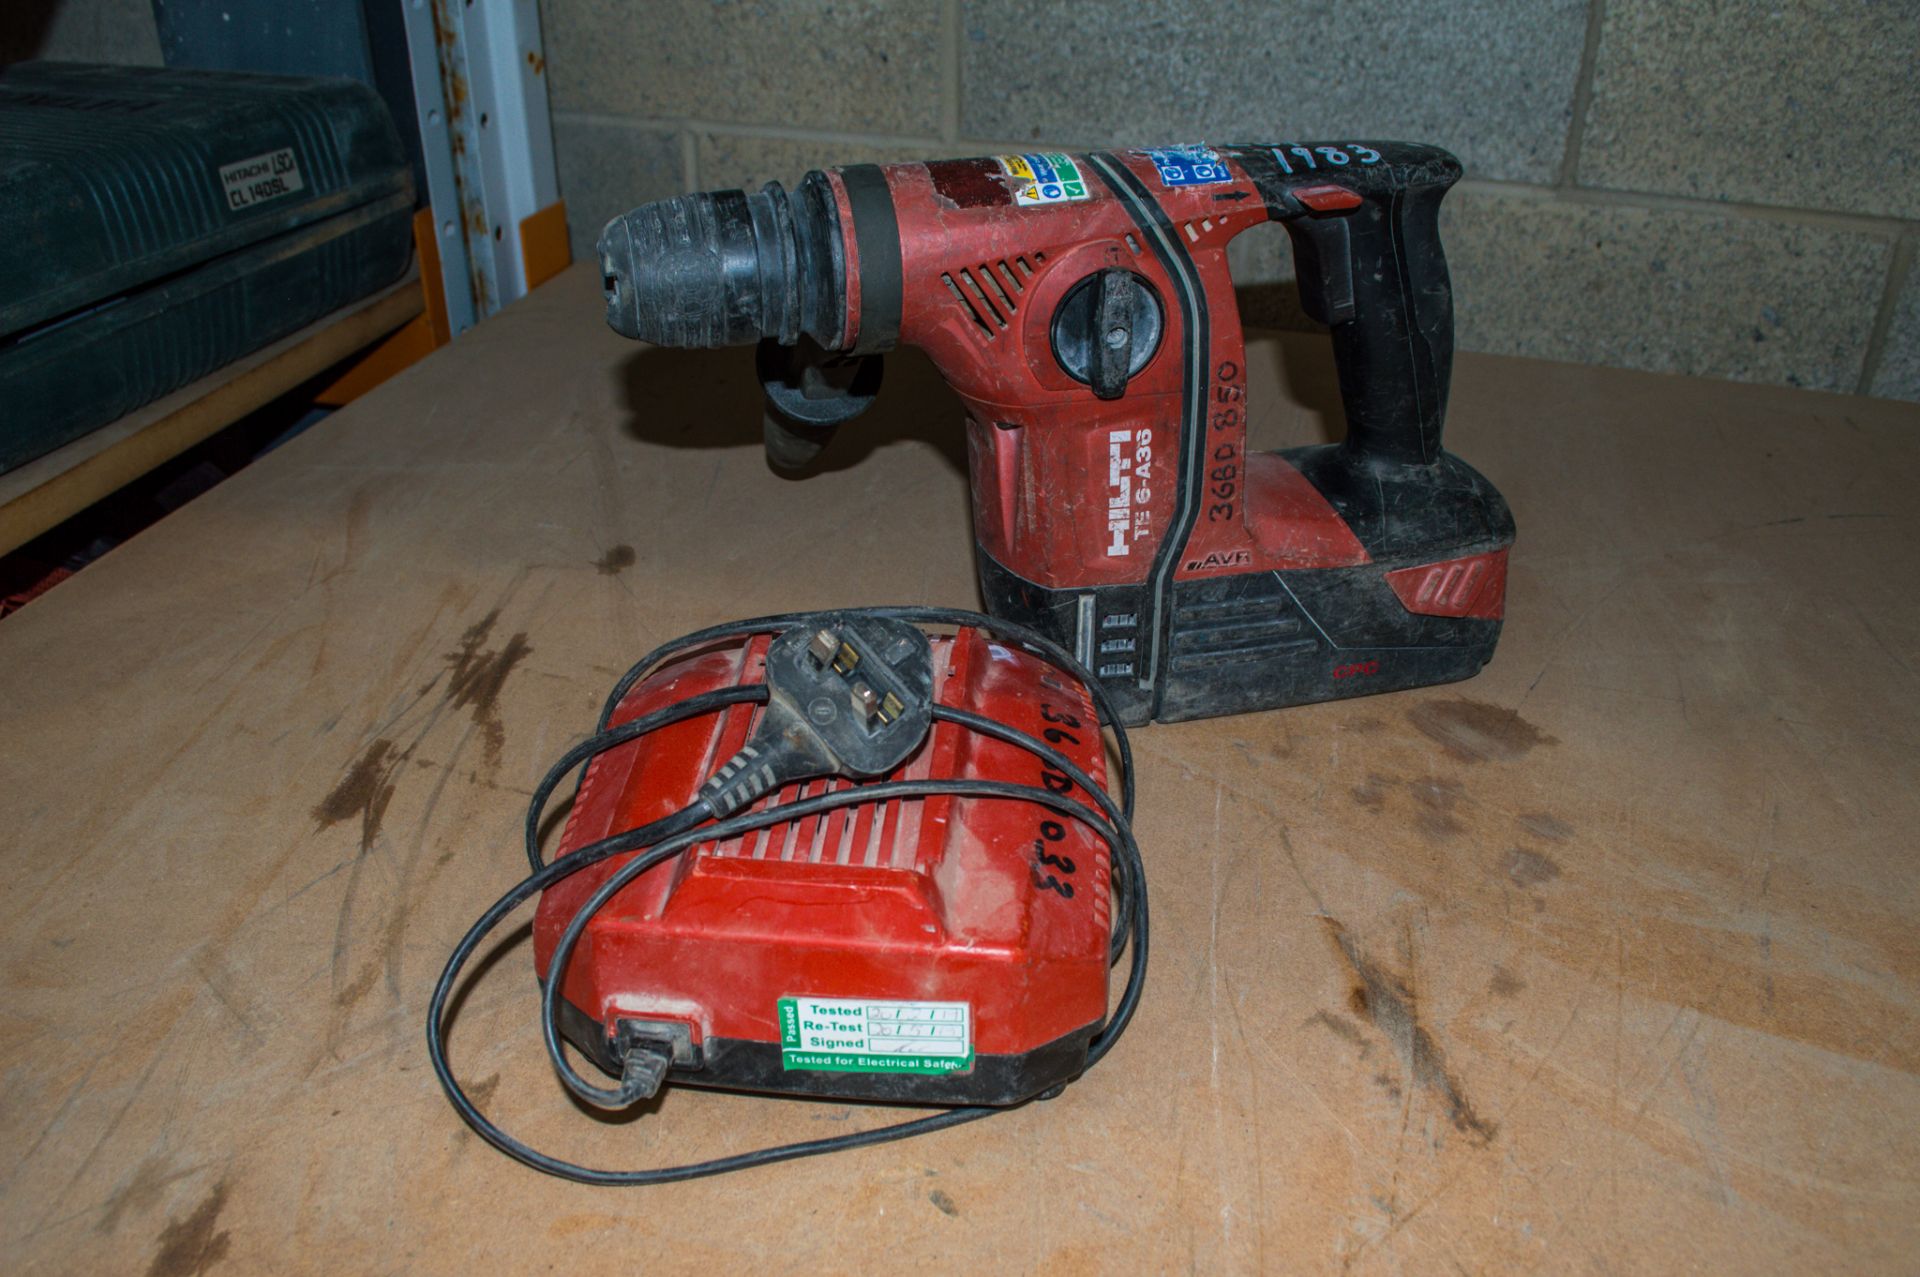 Hilti TE-6-A36 cordless SDS rotary hammer drill c/w charger and battery 36BD850